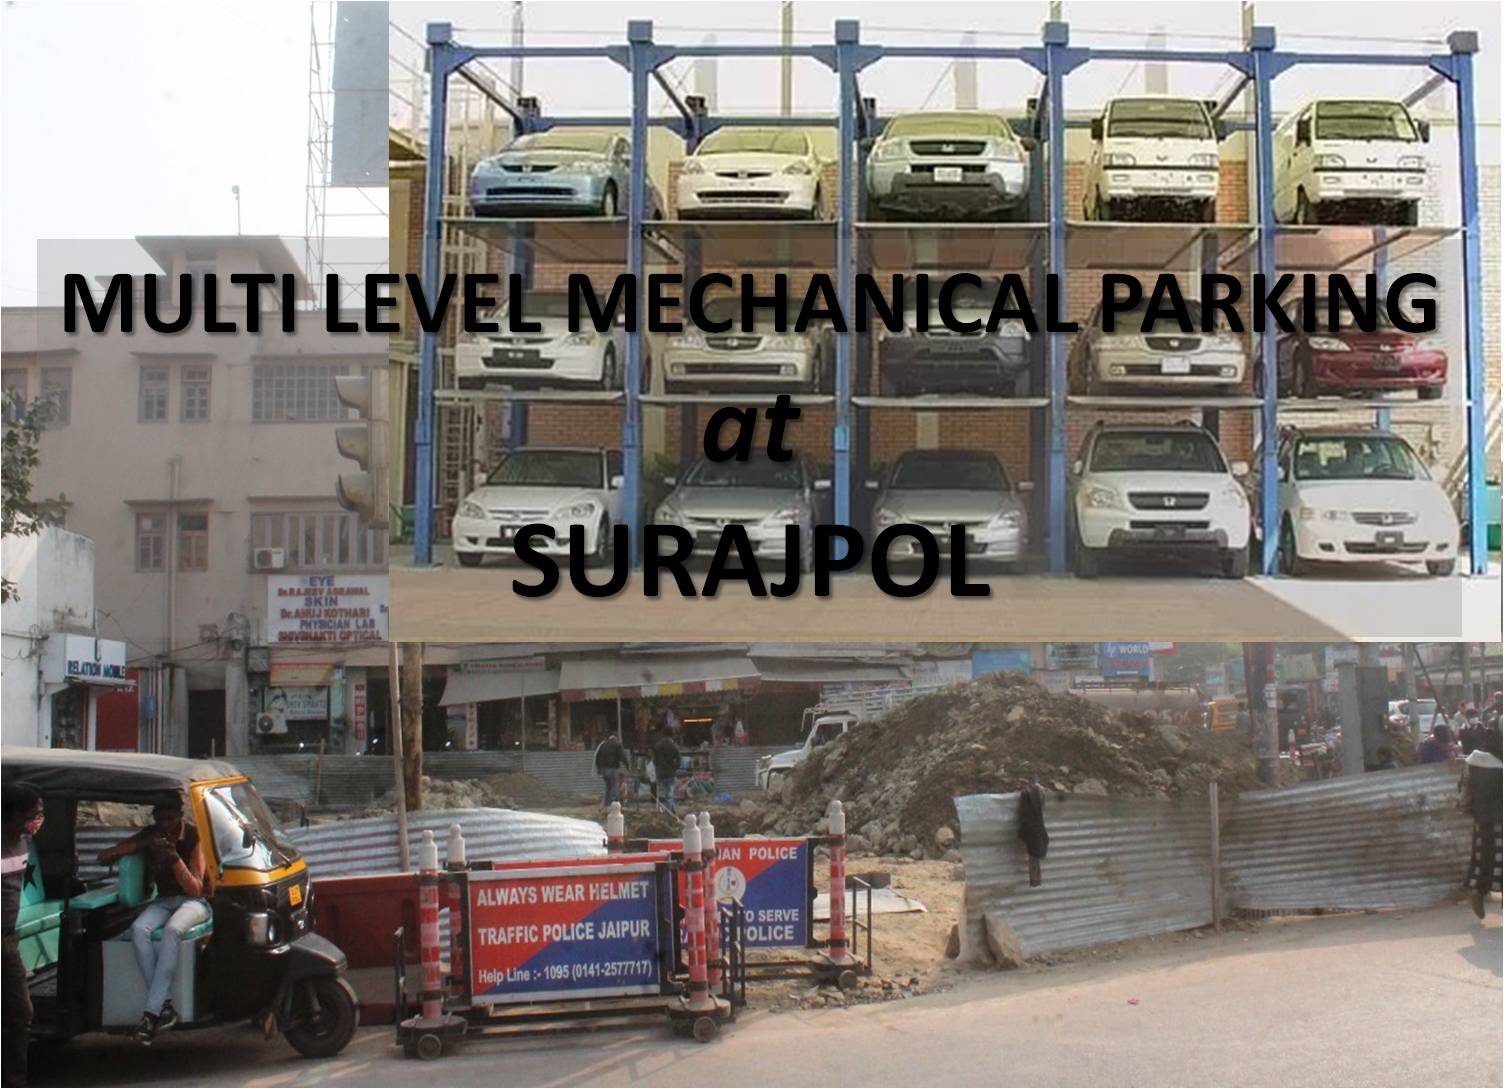 Historical Surajpol Tanga Stand will soon host a Mechanical Parking - will boost business and ease congestion